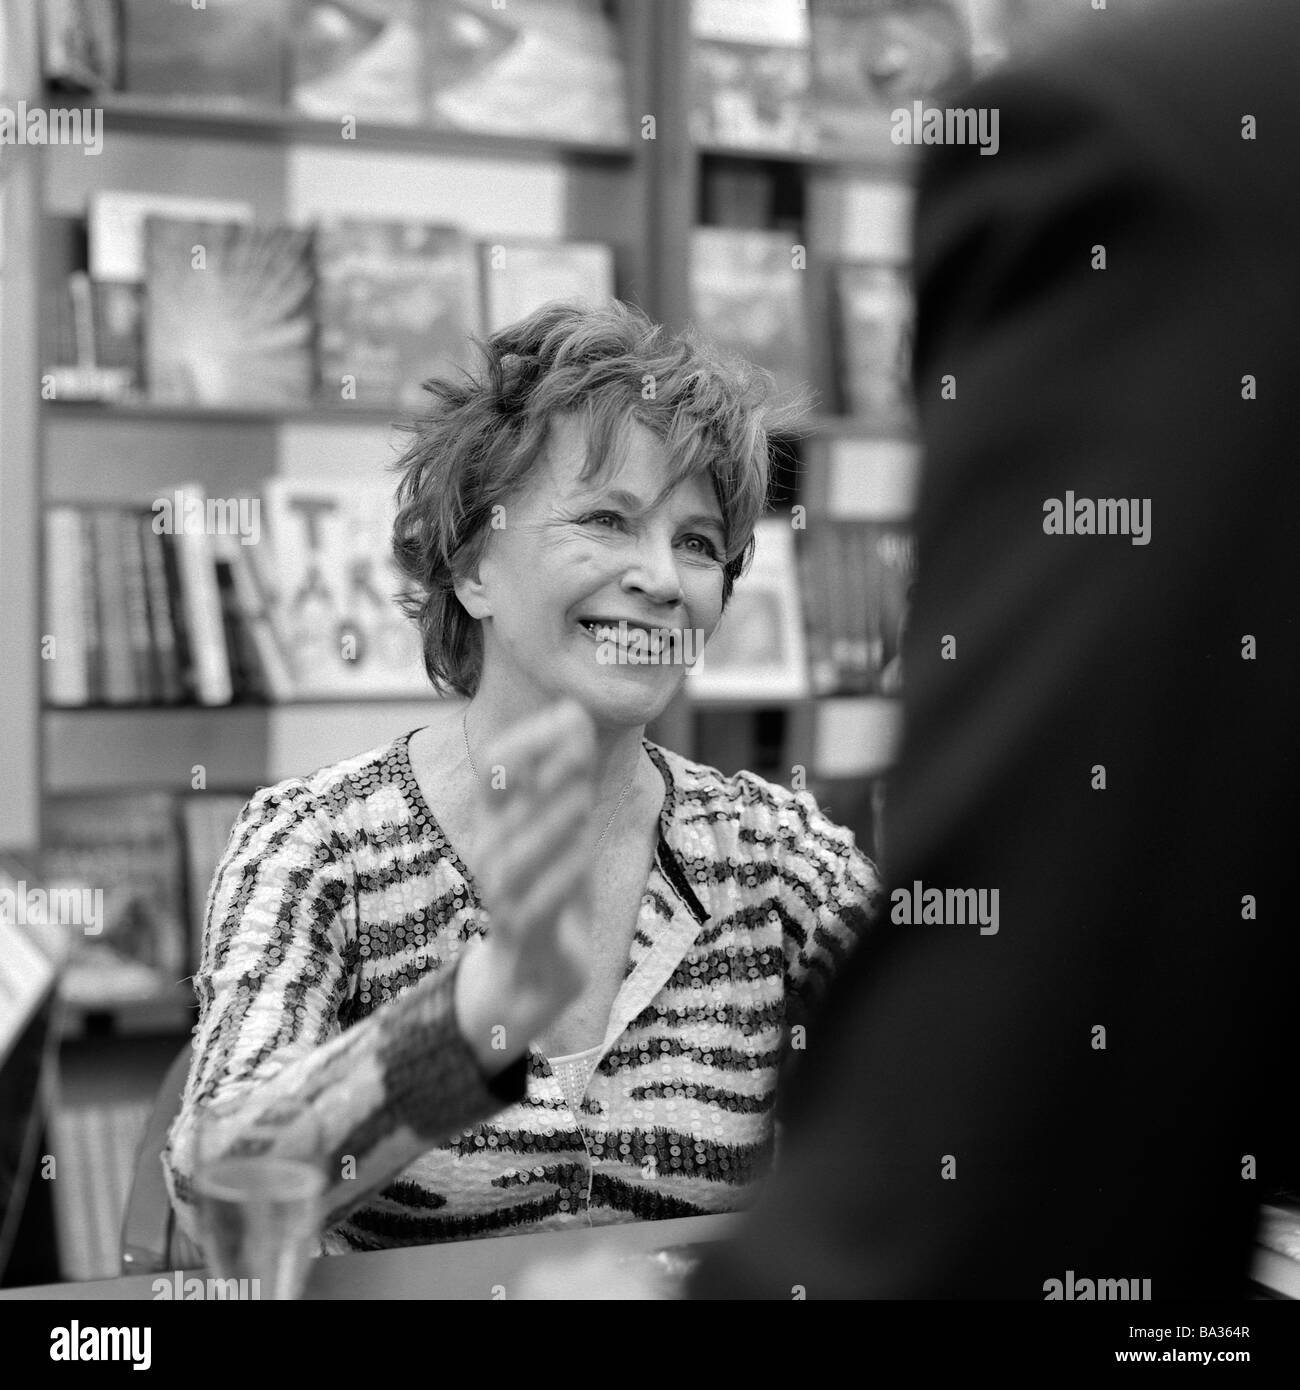 Irish author Edna O"Brien book signing at the 2002 Hay Festival in Hay-on-Wye Wales UK   KATHY DEWITT Stock Photo